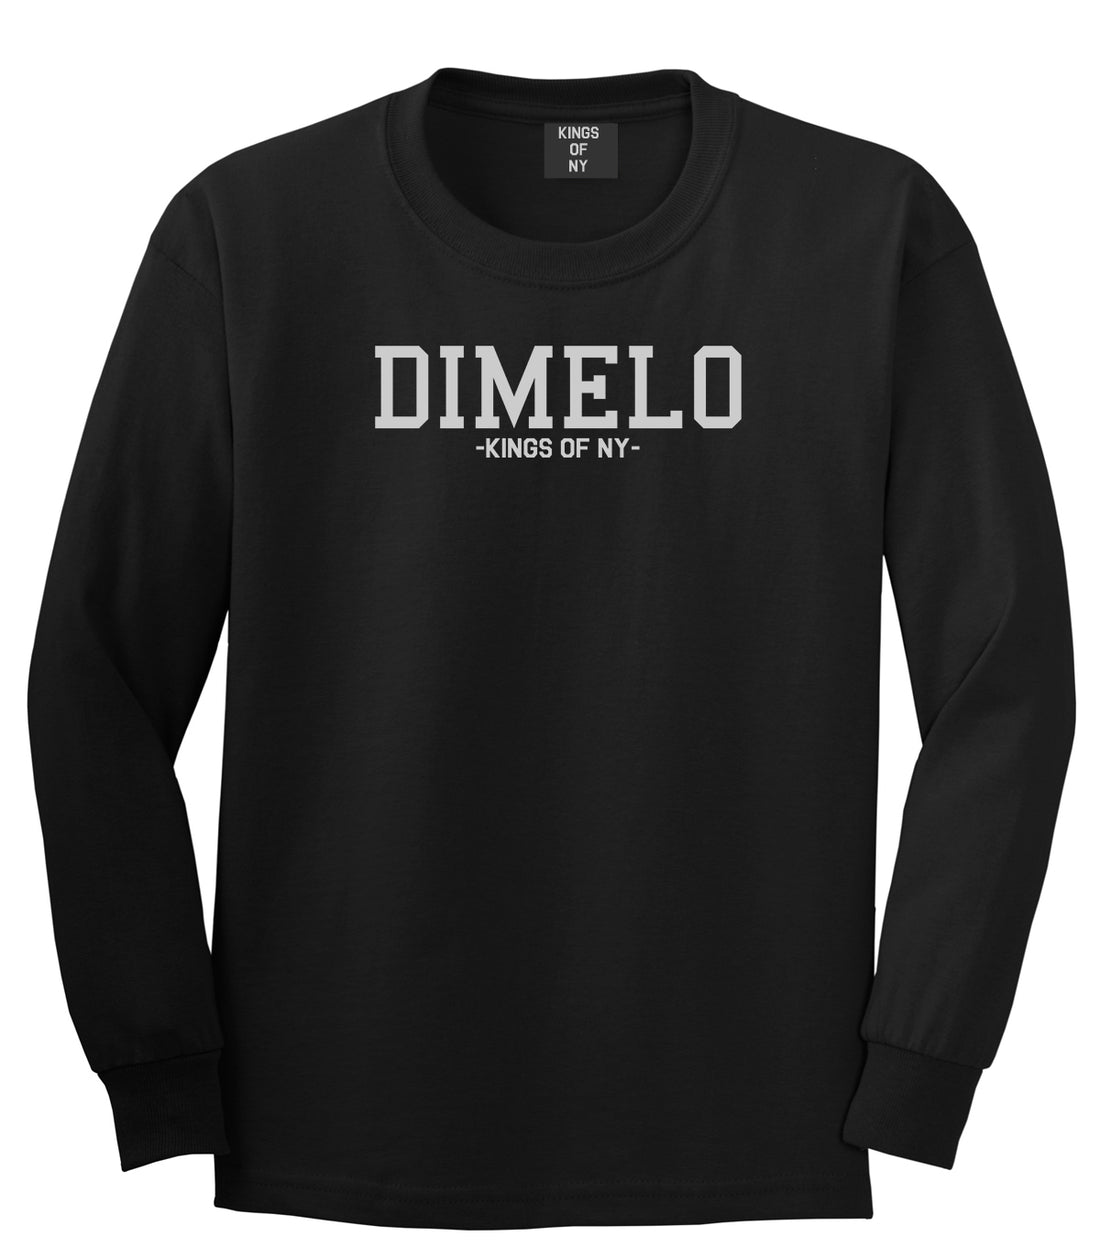 Dimelo Kings Of NY Long Sleeve T-Shirt in Black